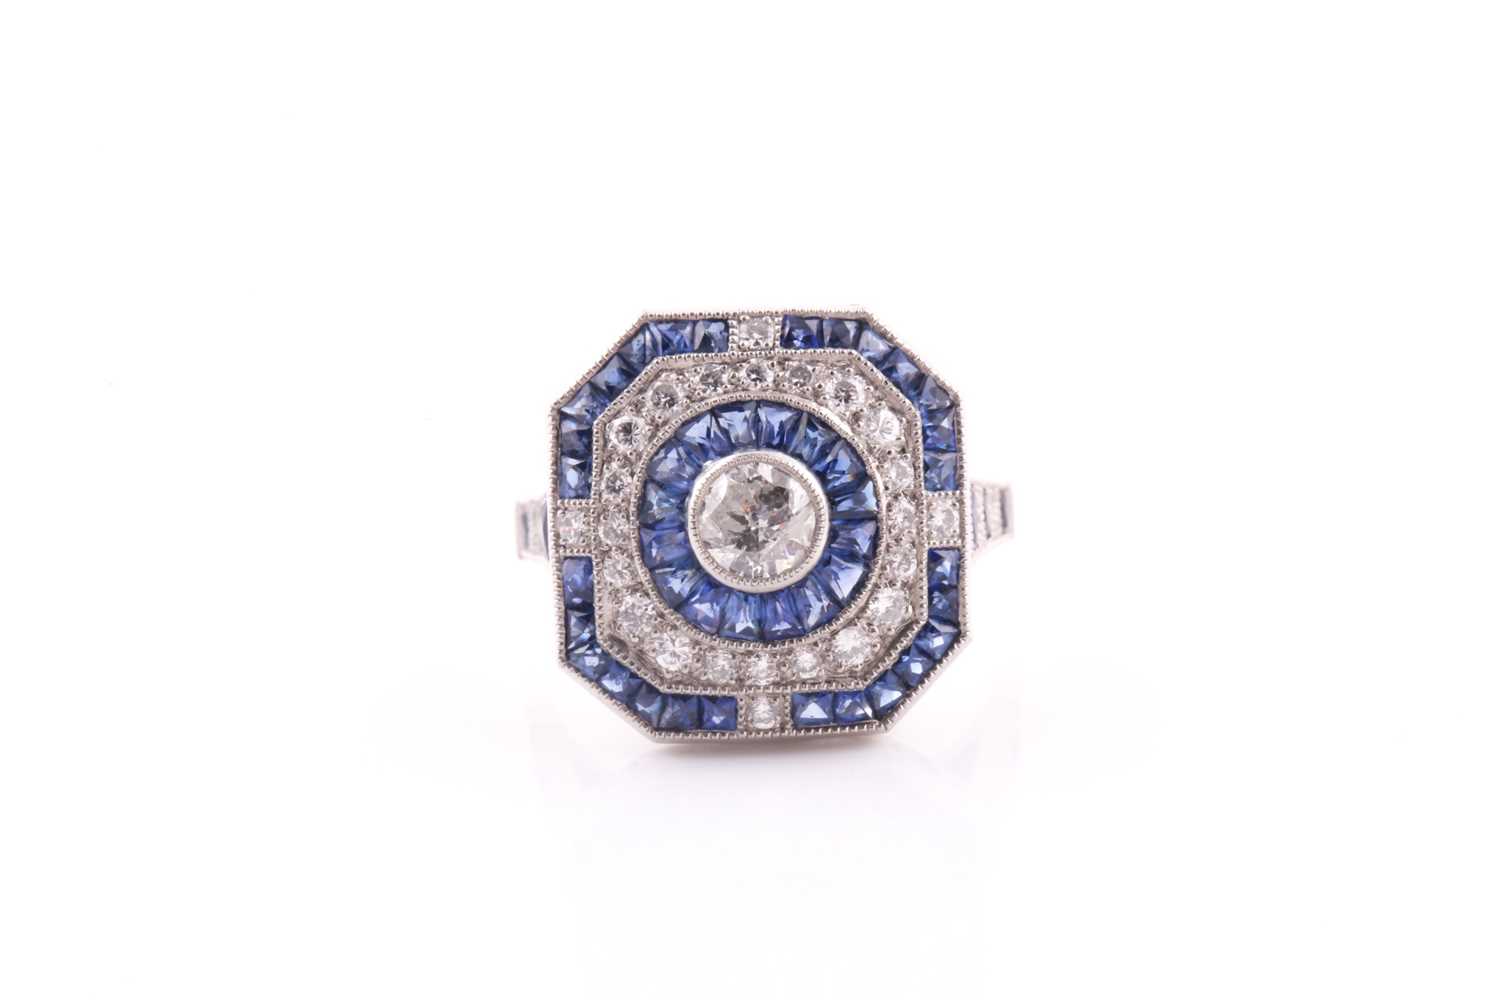 A platinum, diamond, and sapphire cluster ring, centred with a round-cut diamond within a